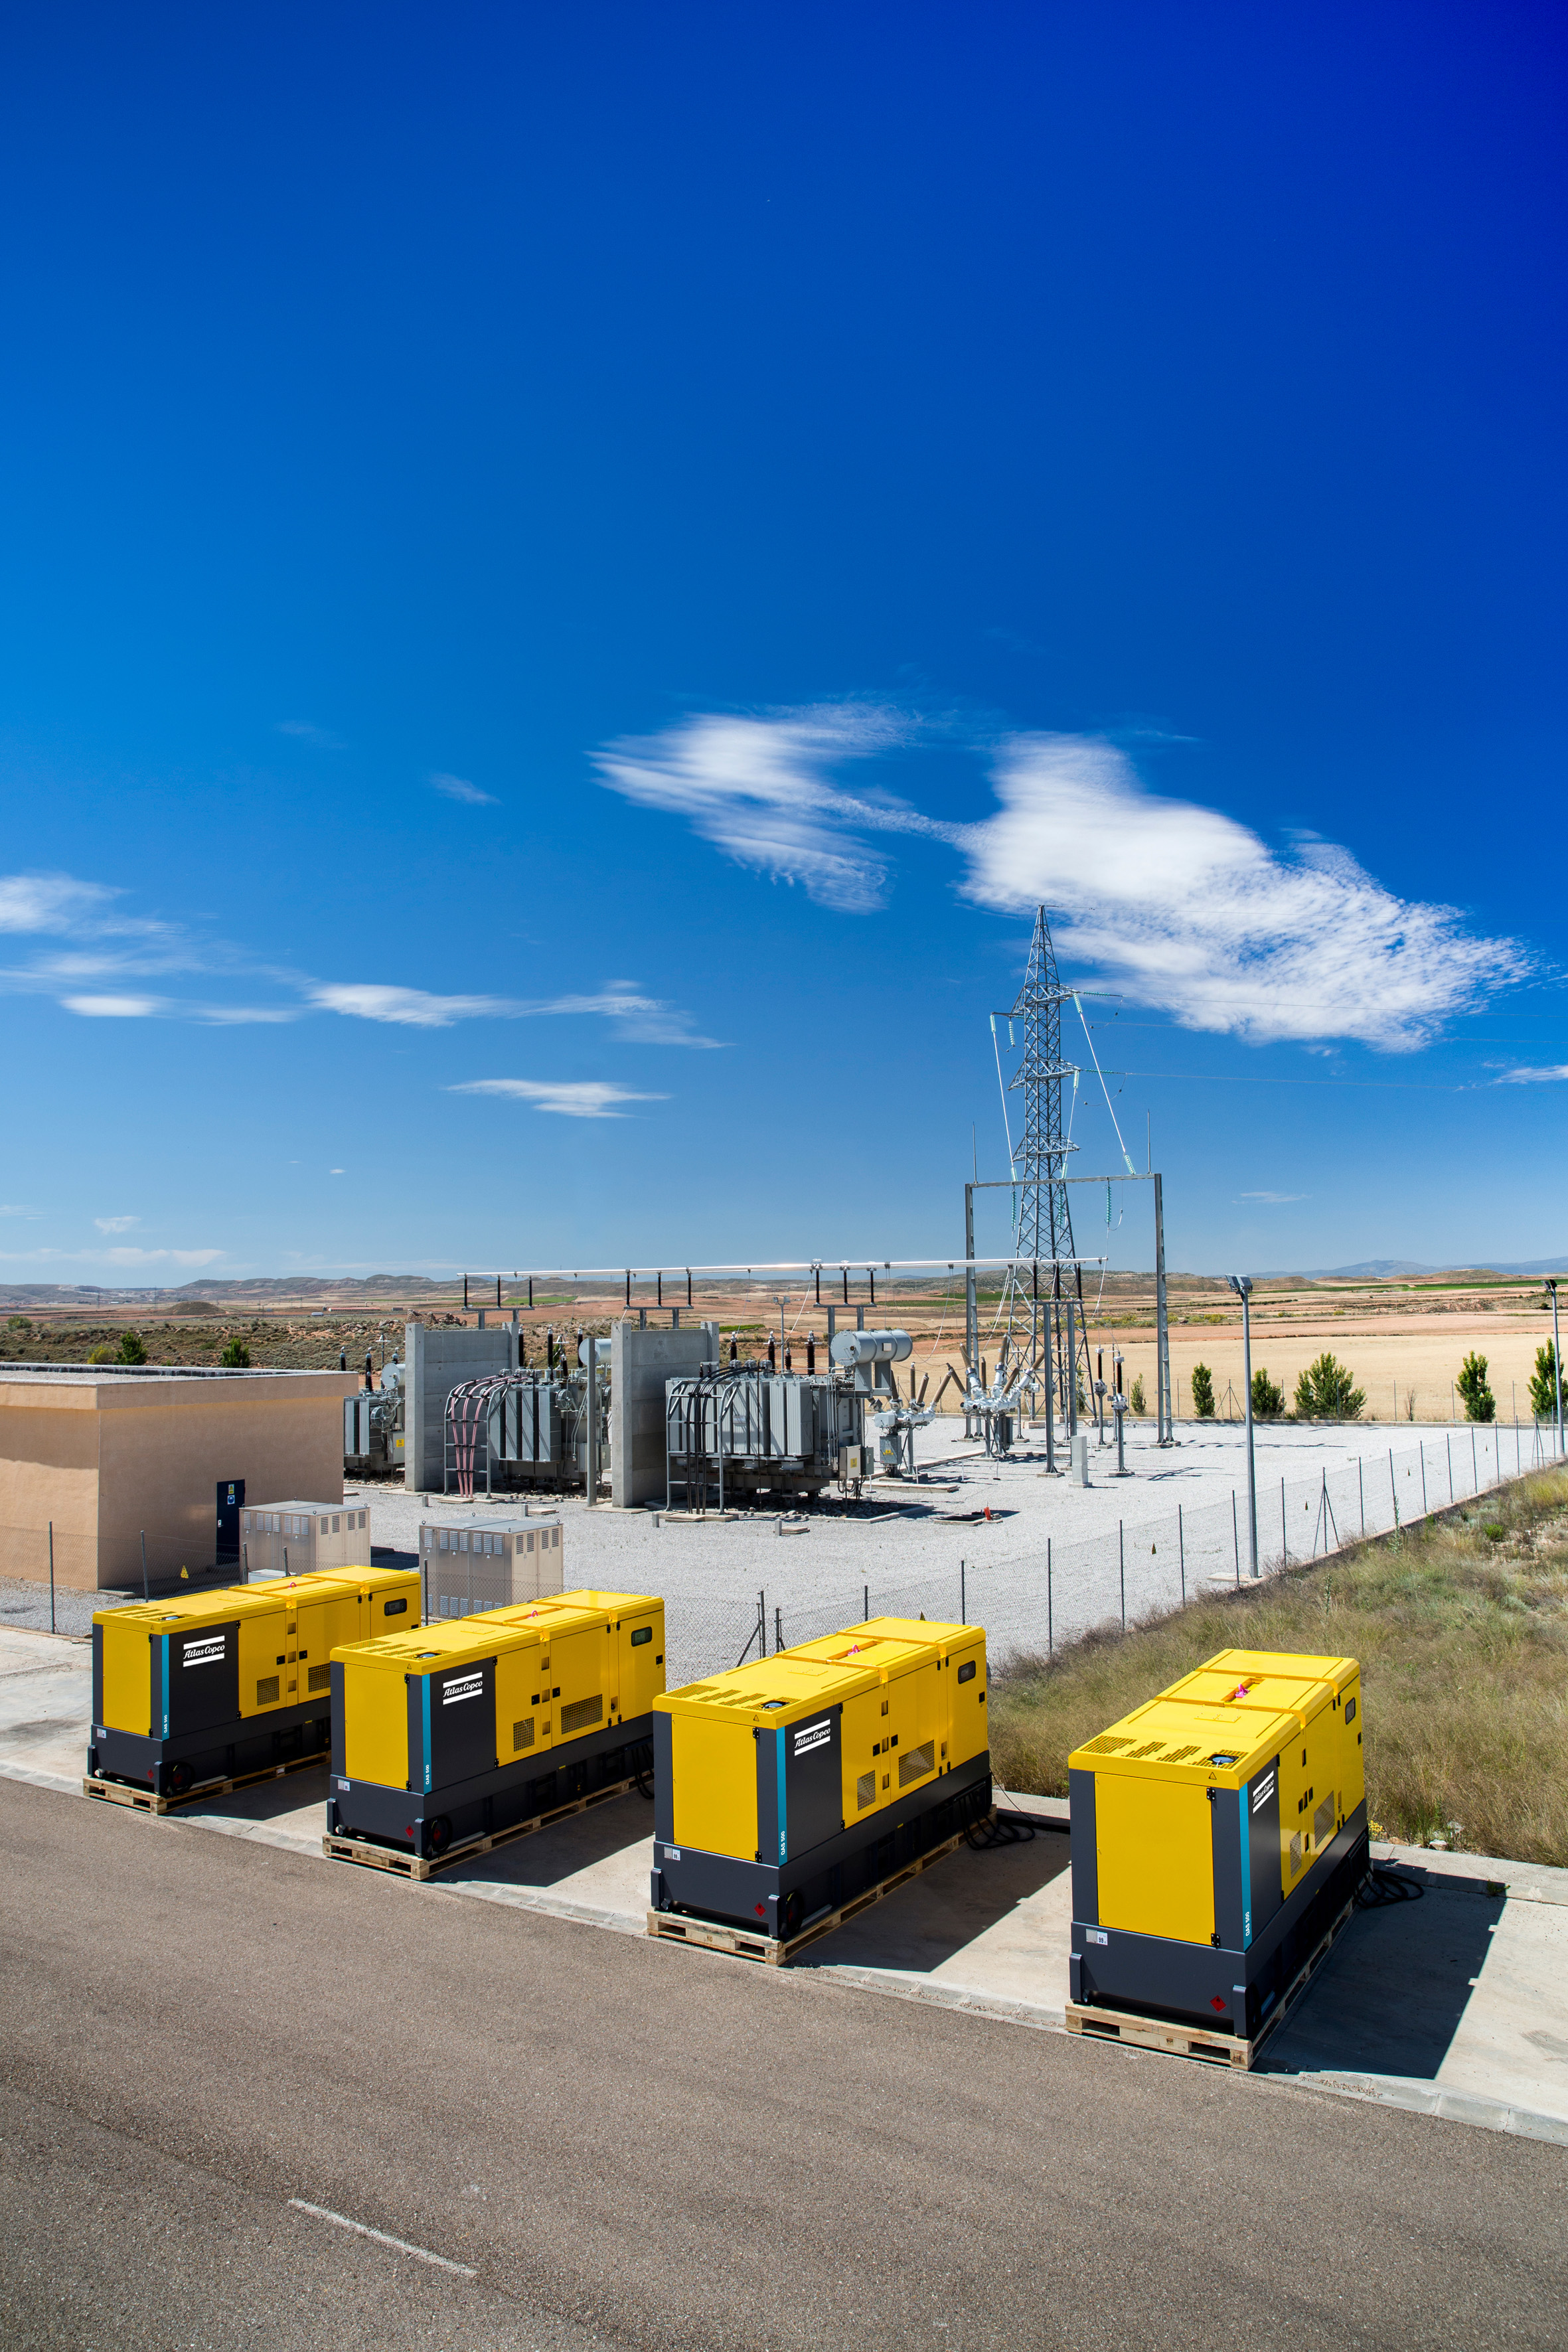 Many generators are now equipped with Power Management Systems (PMS). What makes them ideally suited for rental applications is the plug-and-play design that allows for easy and rapid configuration.